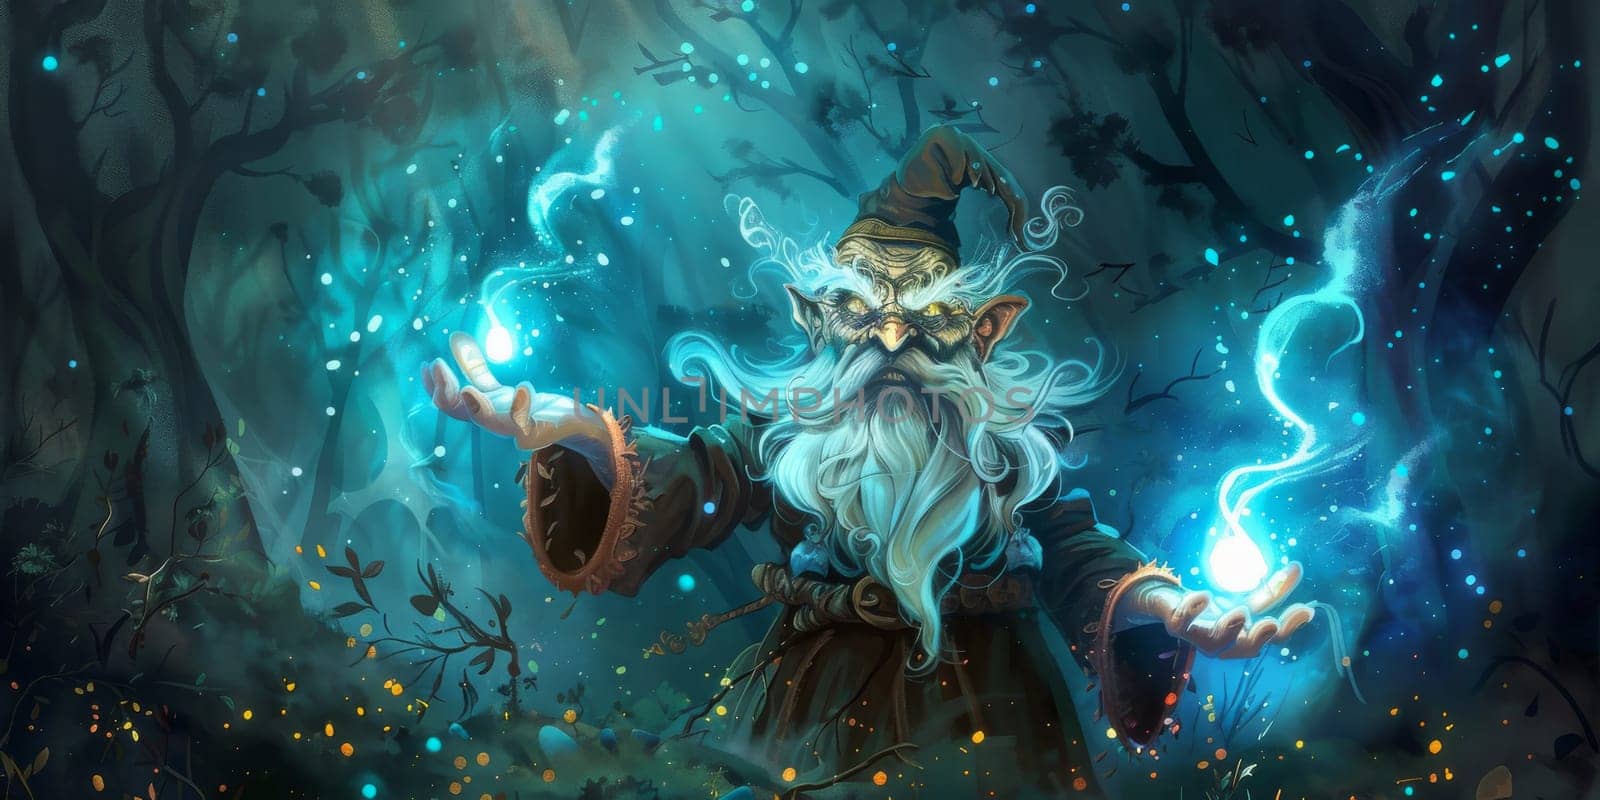 Man sorcerer magic casting a spell, magical concept by Kadula